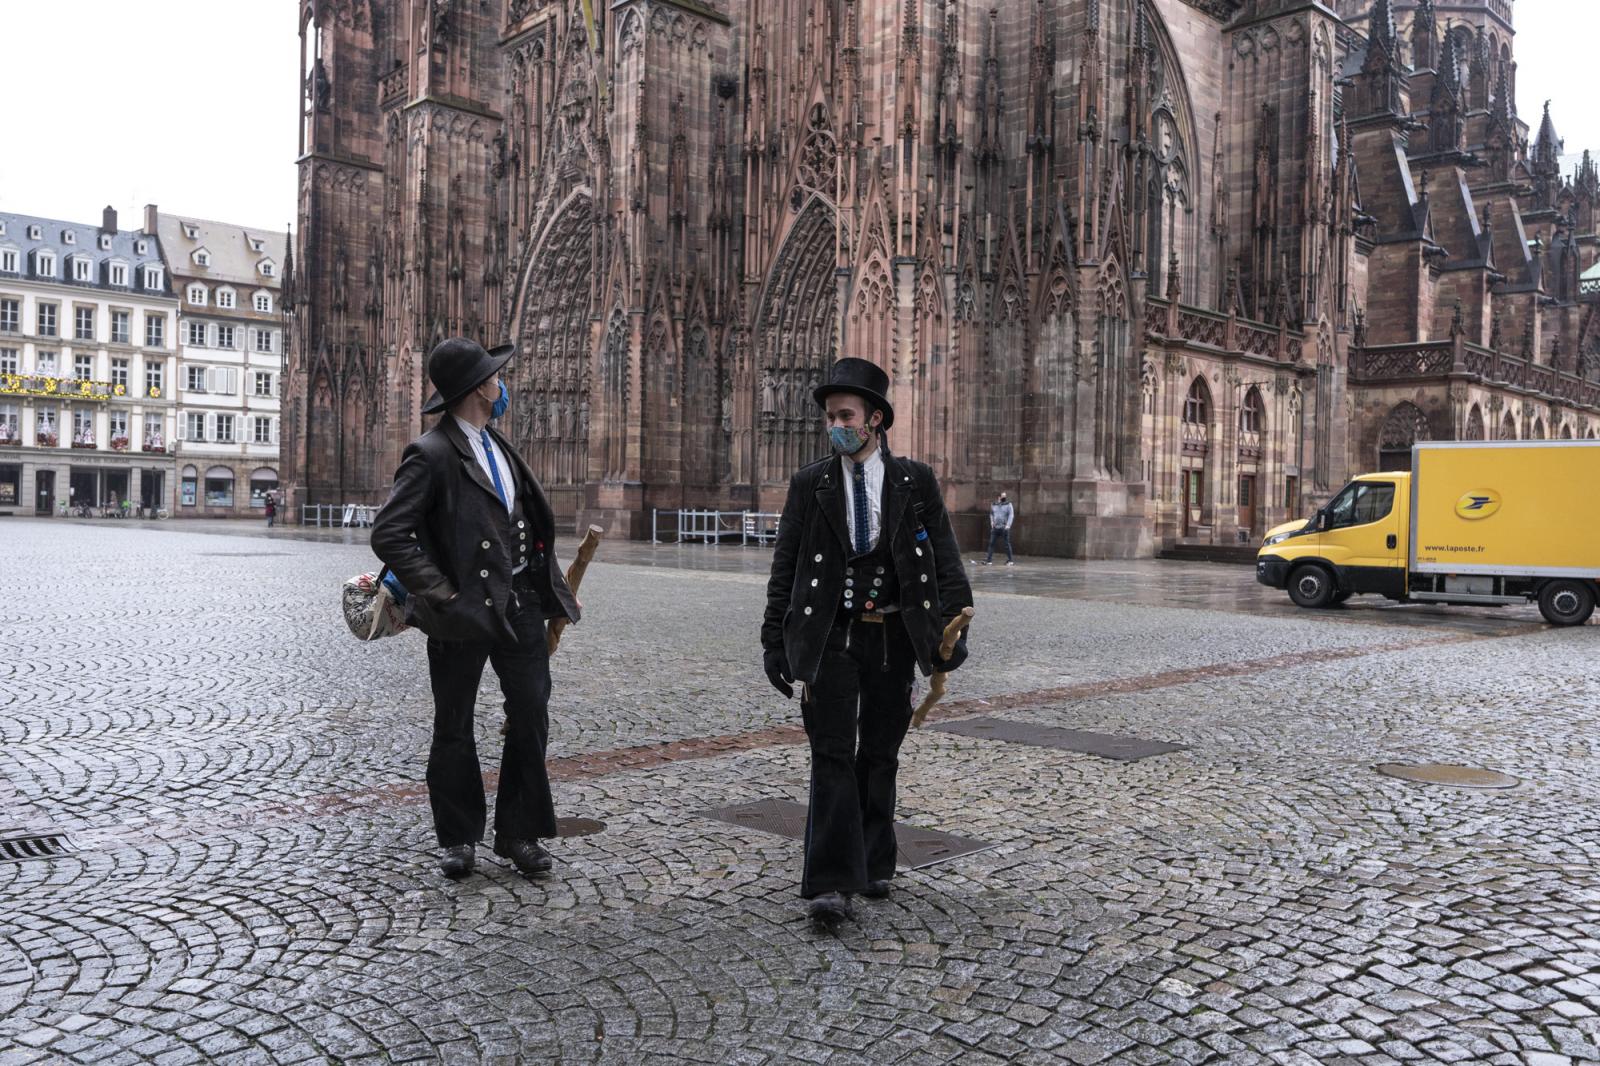   -  Ben (L) and Matthias walk away from the cathedral of Strasbourg, where they just met to start...